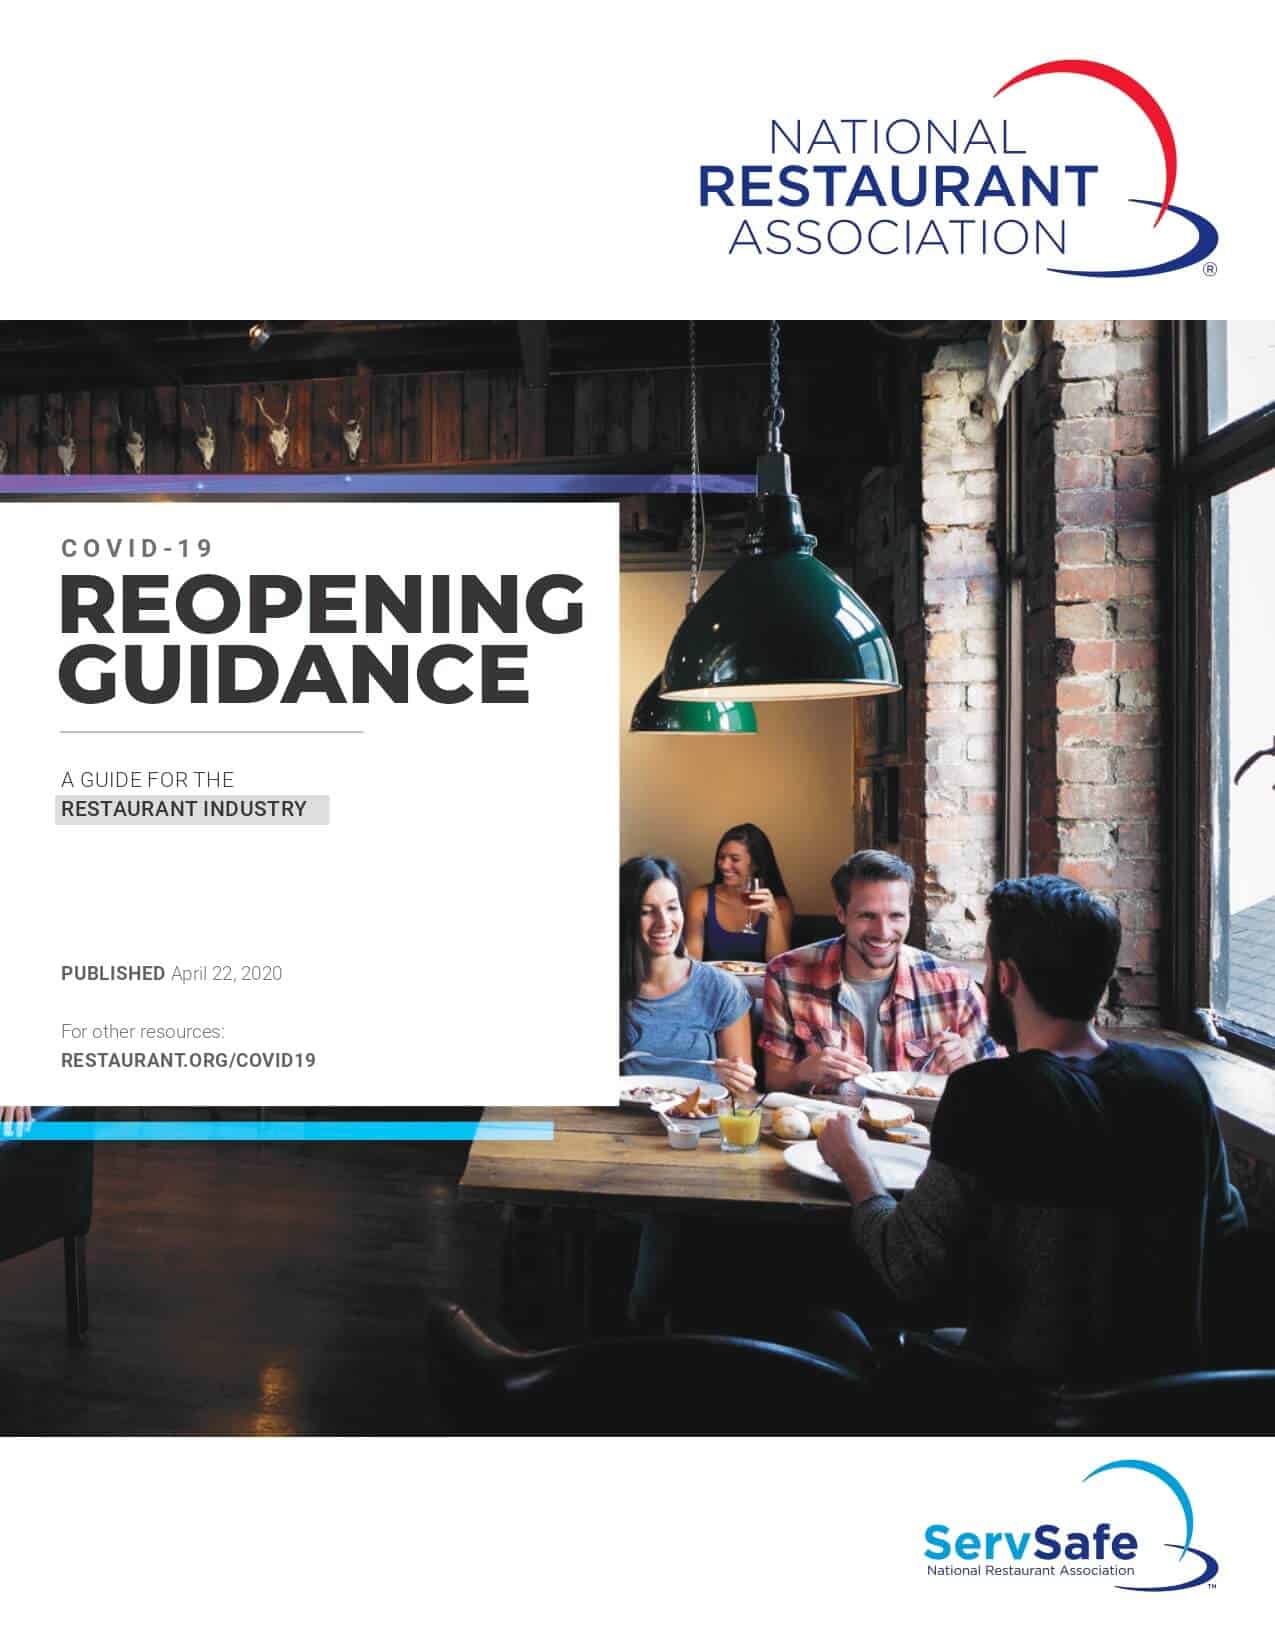 National-Restaurant-Association-COVID19-Reopening-Guidance (1)_page-0001